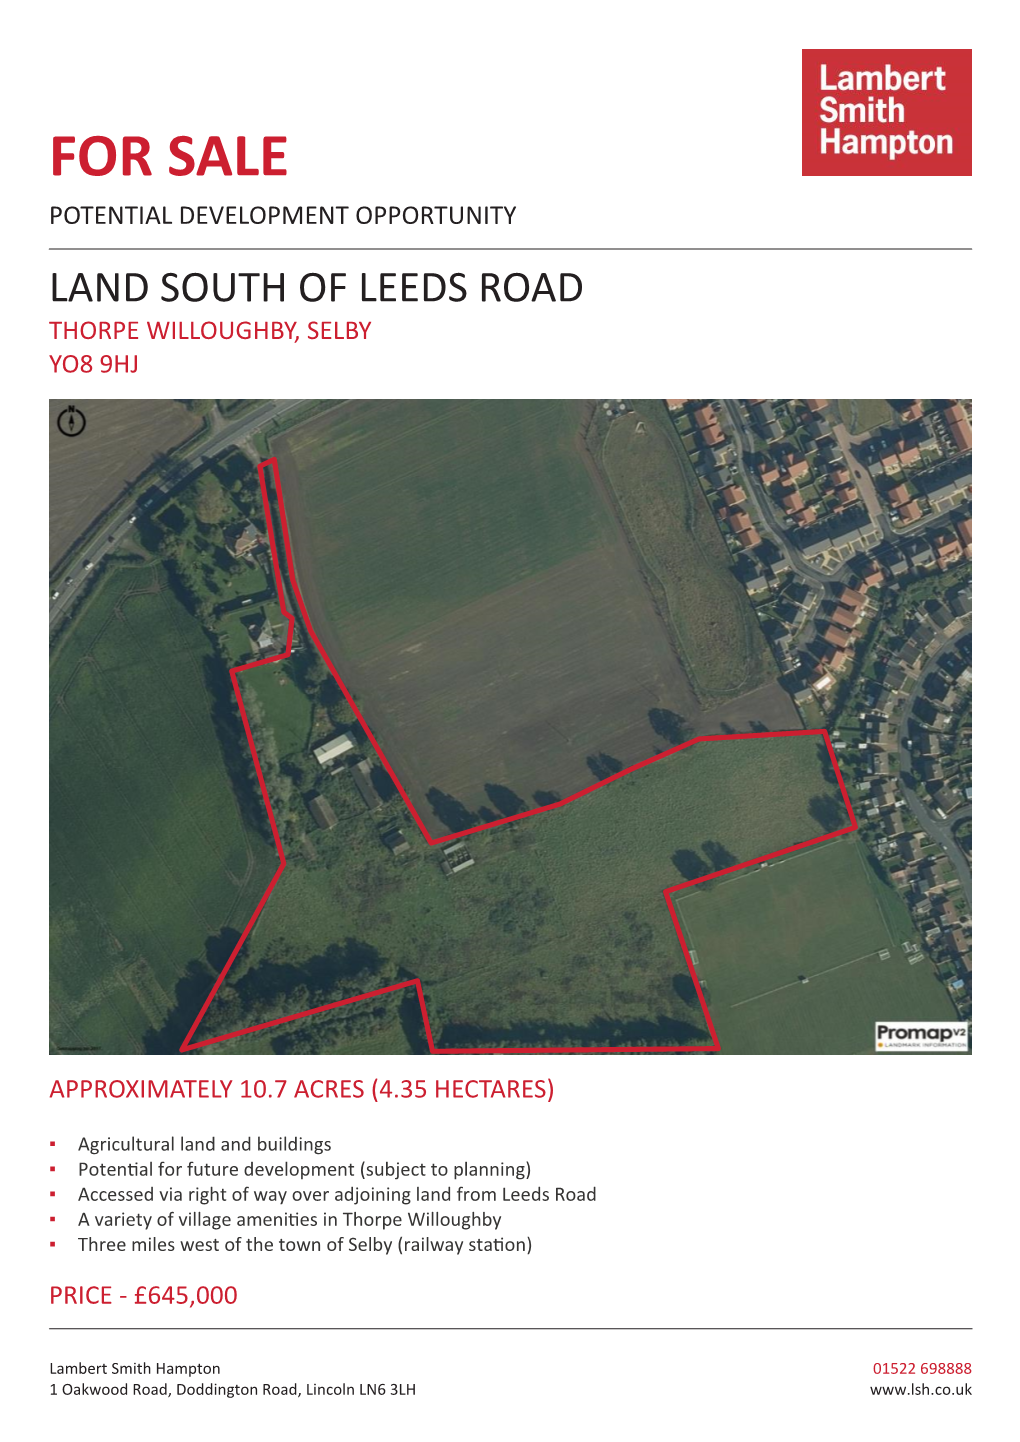 For Sale Potential Development Opportunity Land South of Leeds Road Thorpe Willoughby, Selby Yo8 9Hj